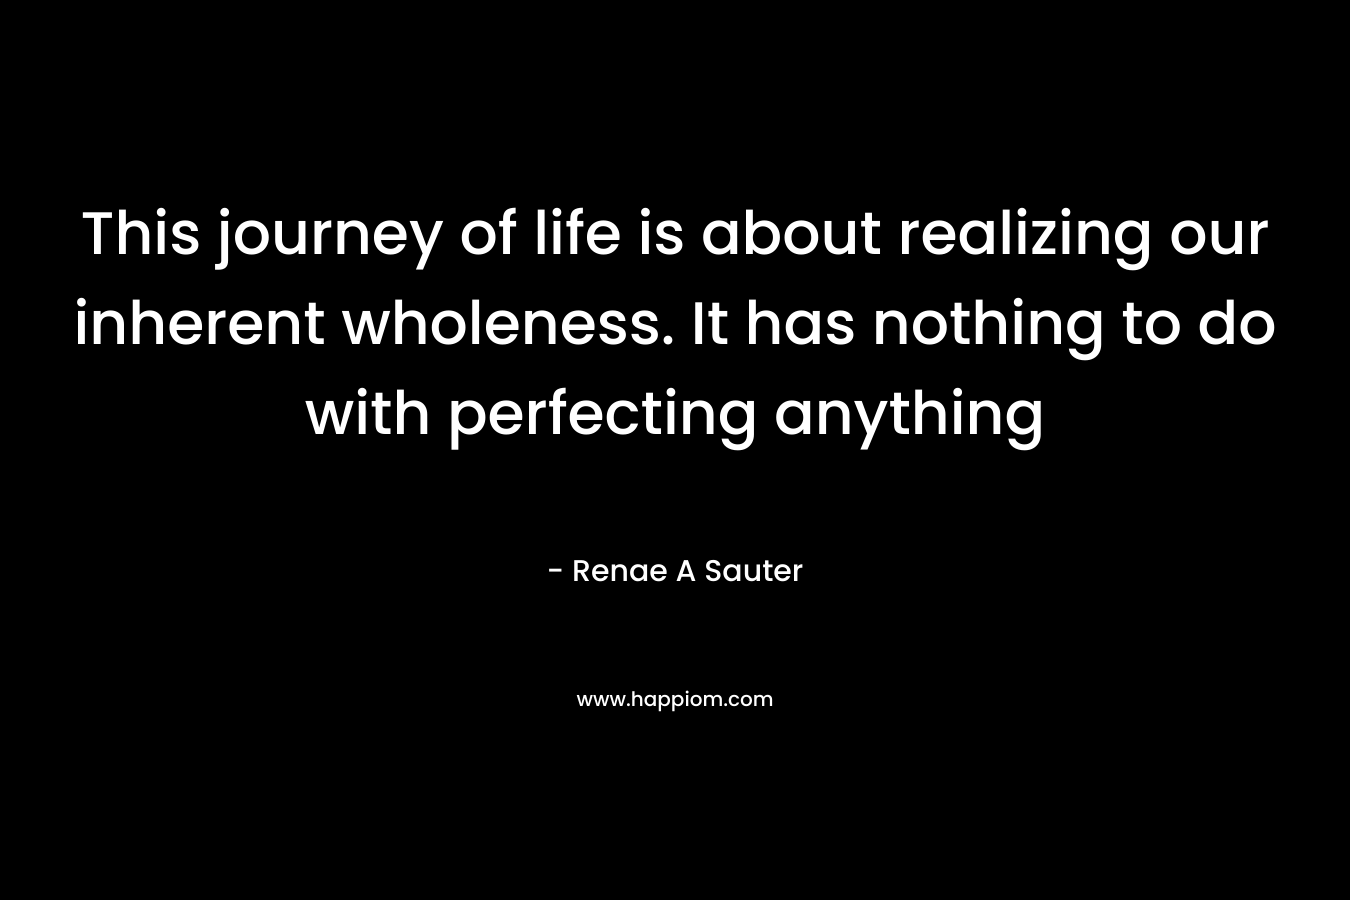 This journey of life is about realizing our inherent wholeness. It has nothing to do with perfecting anything